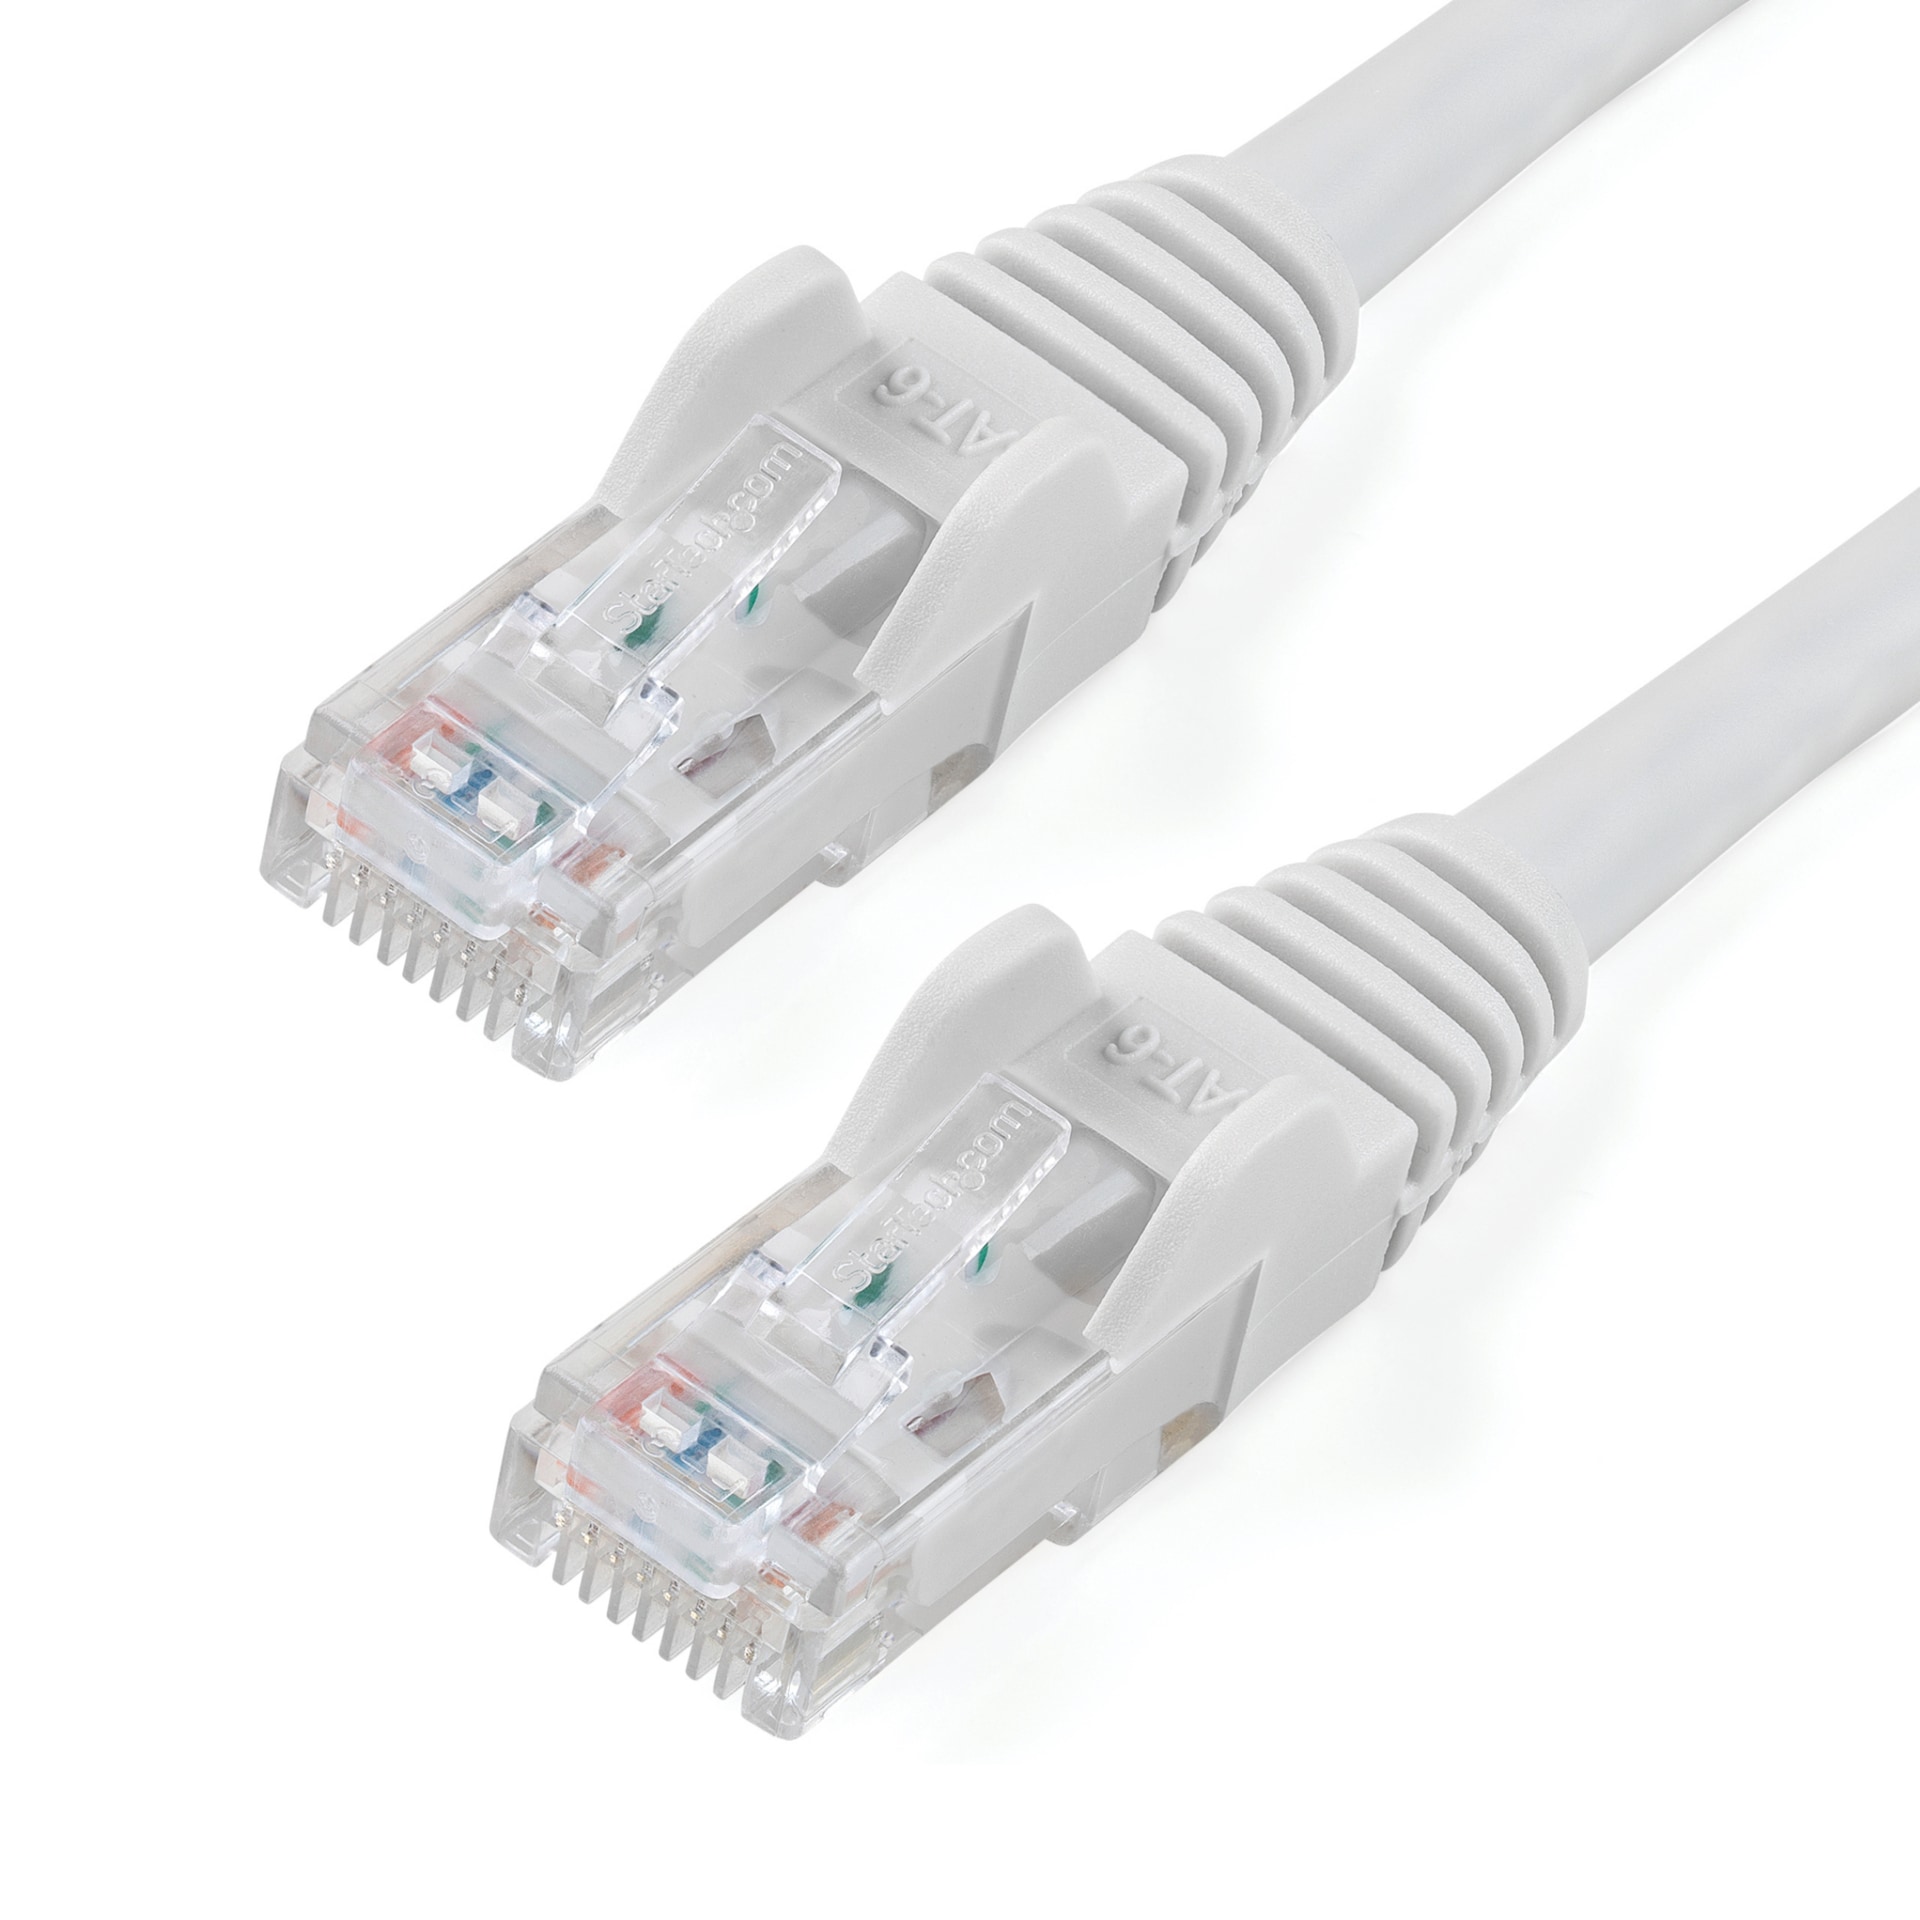 StarTech.com 100ft CAT6 Ethernet Cable White Snagless UTP CAT 6 Gigabit Cord/Wire 100W PoE 650MHz